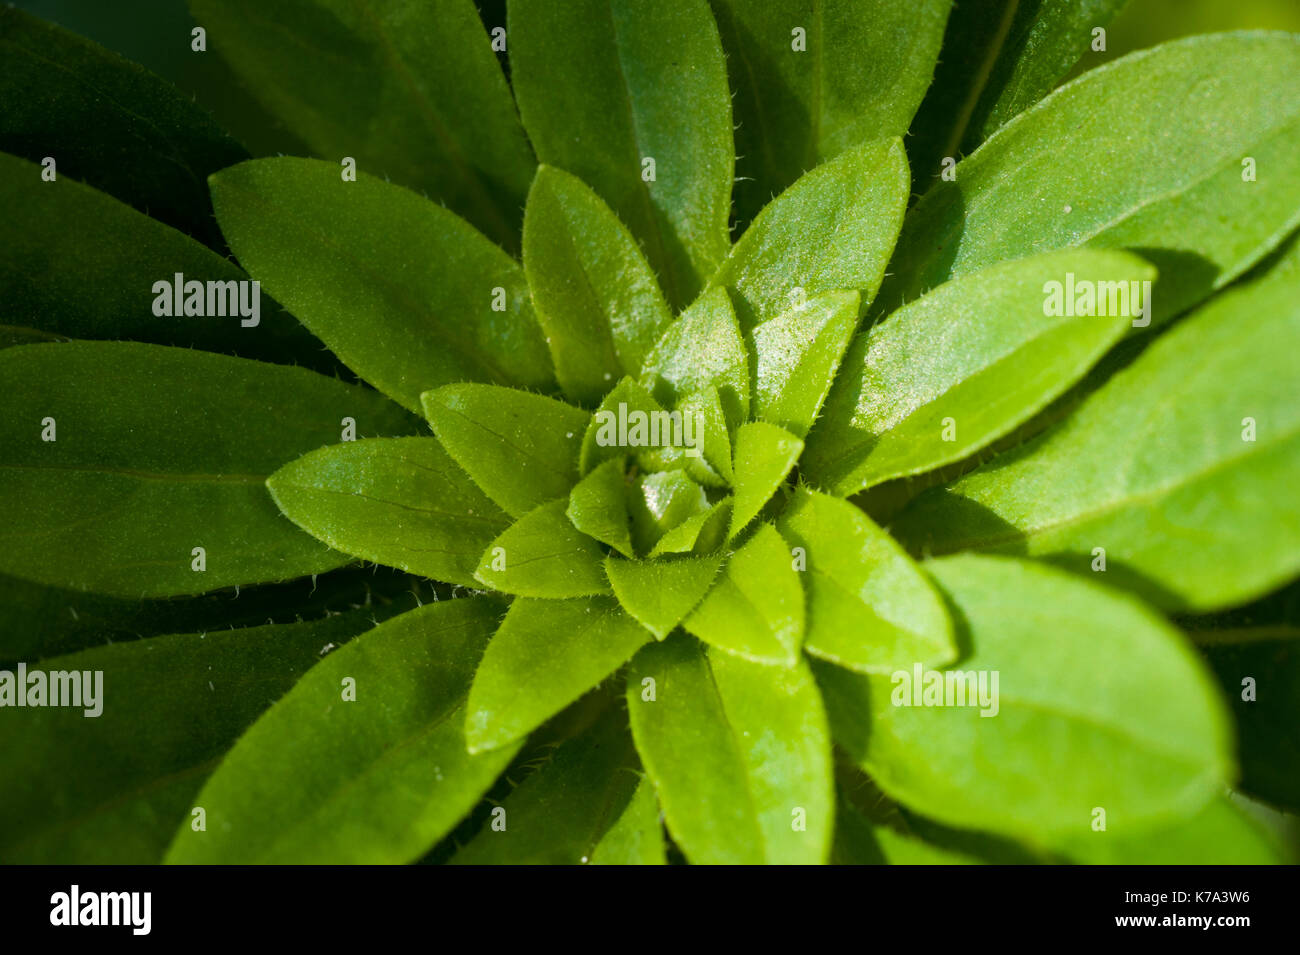 macro photo of a green plant, top view Stock Photo